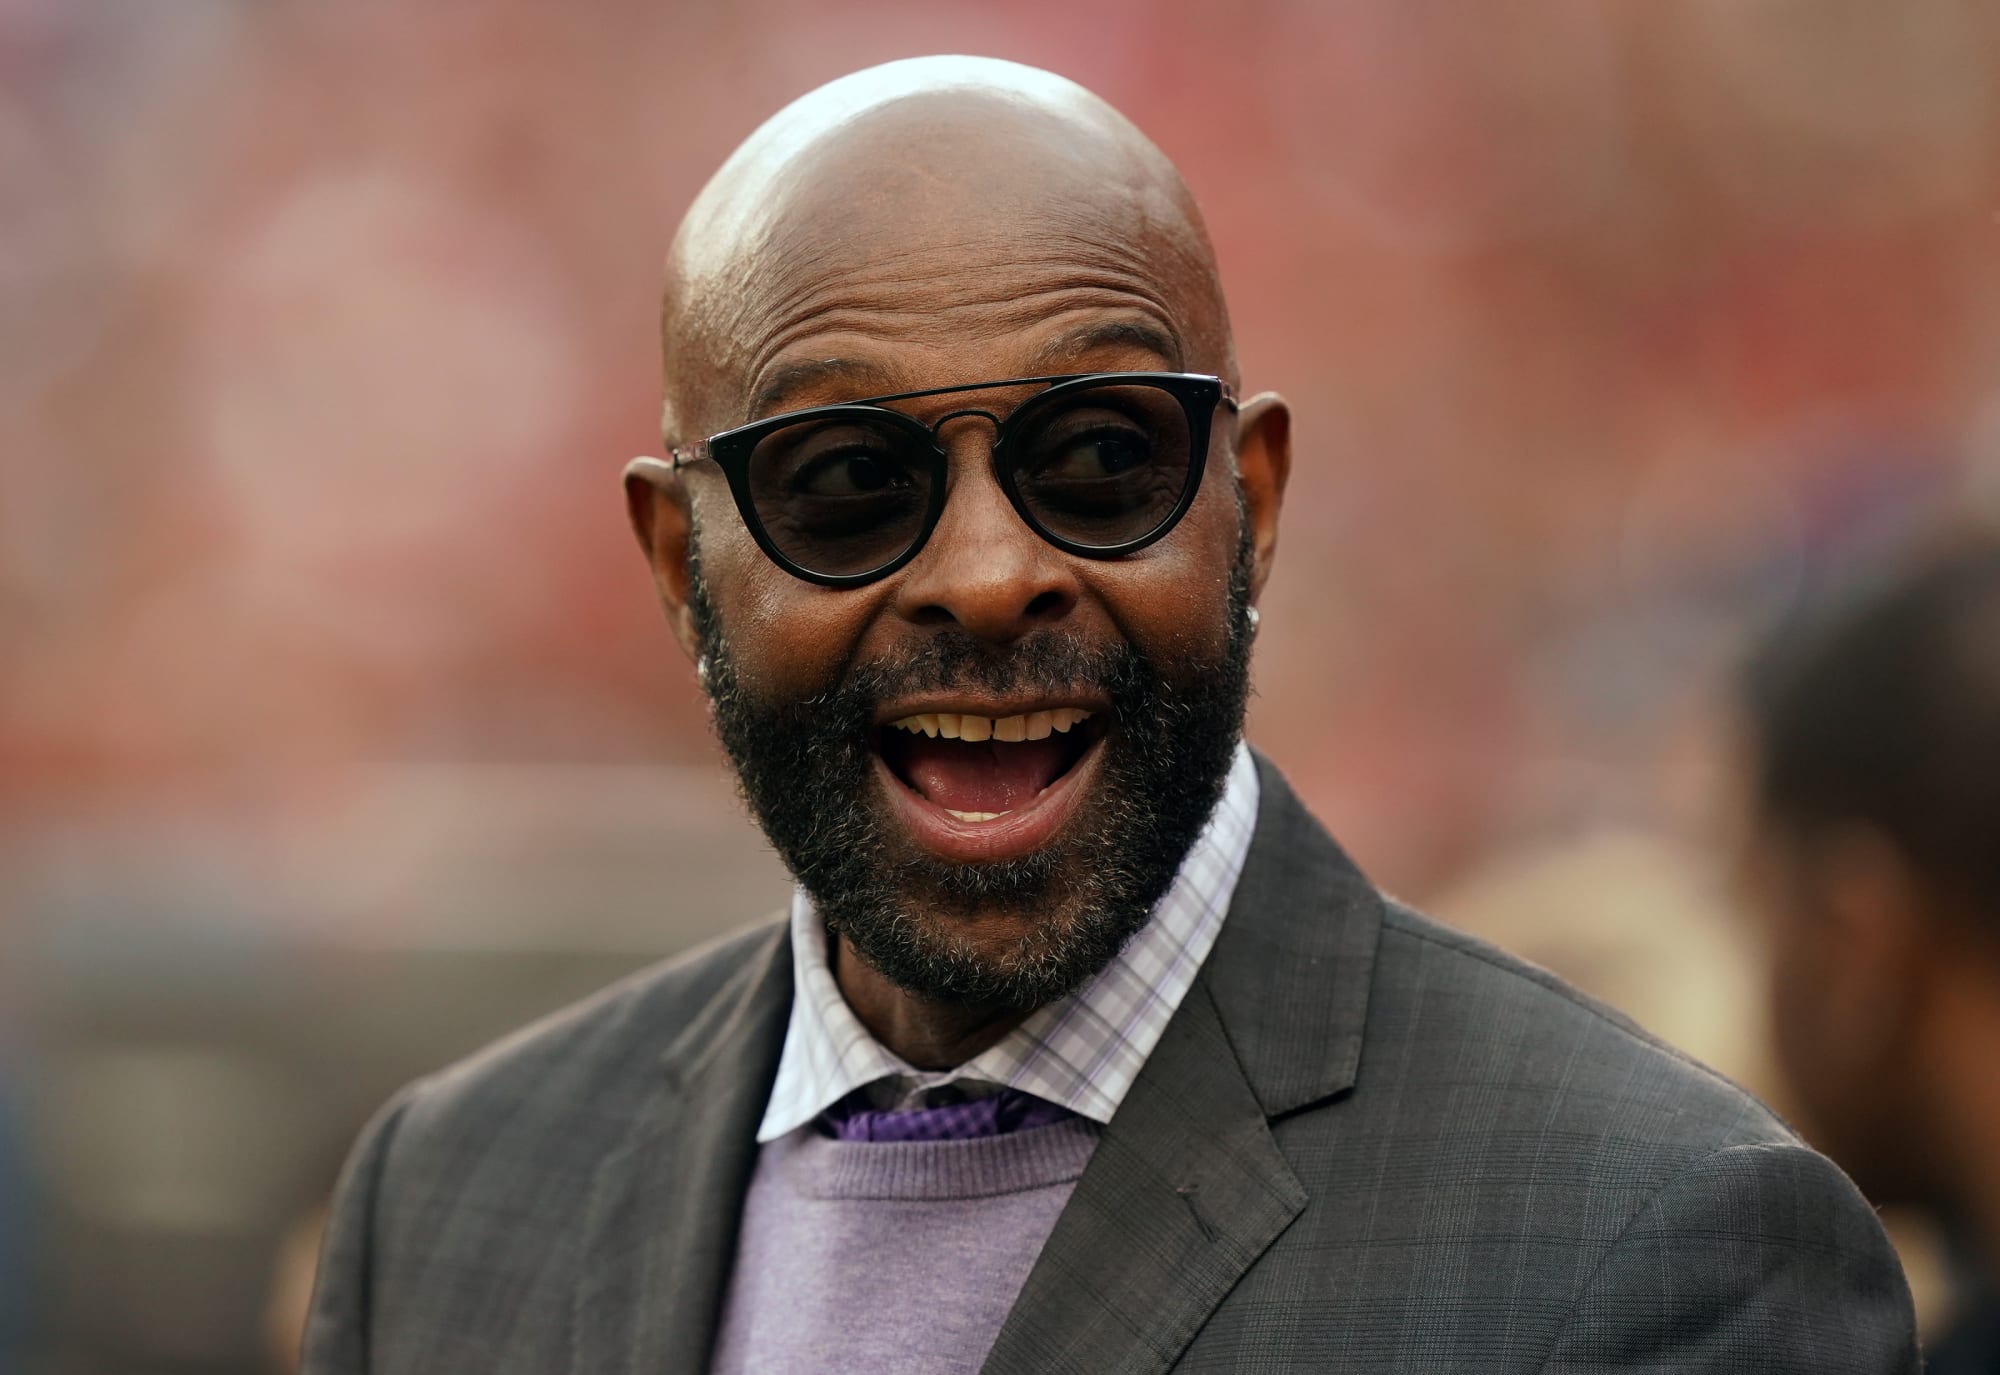 Jerry Rice trolled Charles Barkley just before Warriors big win